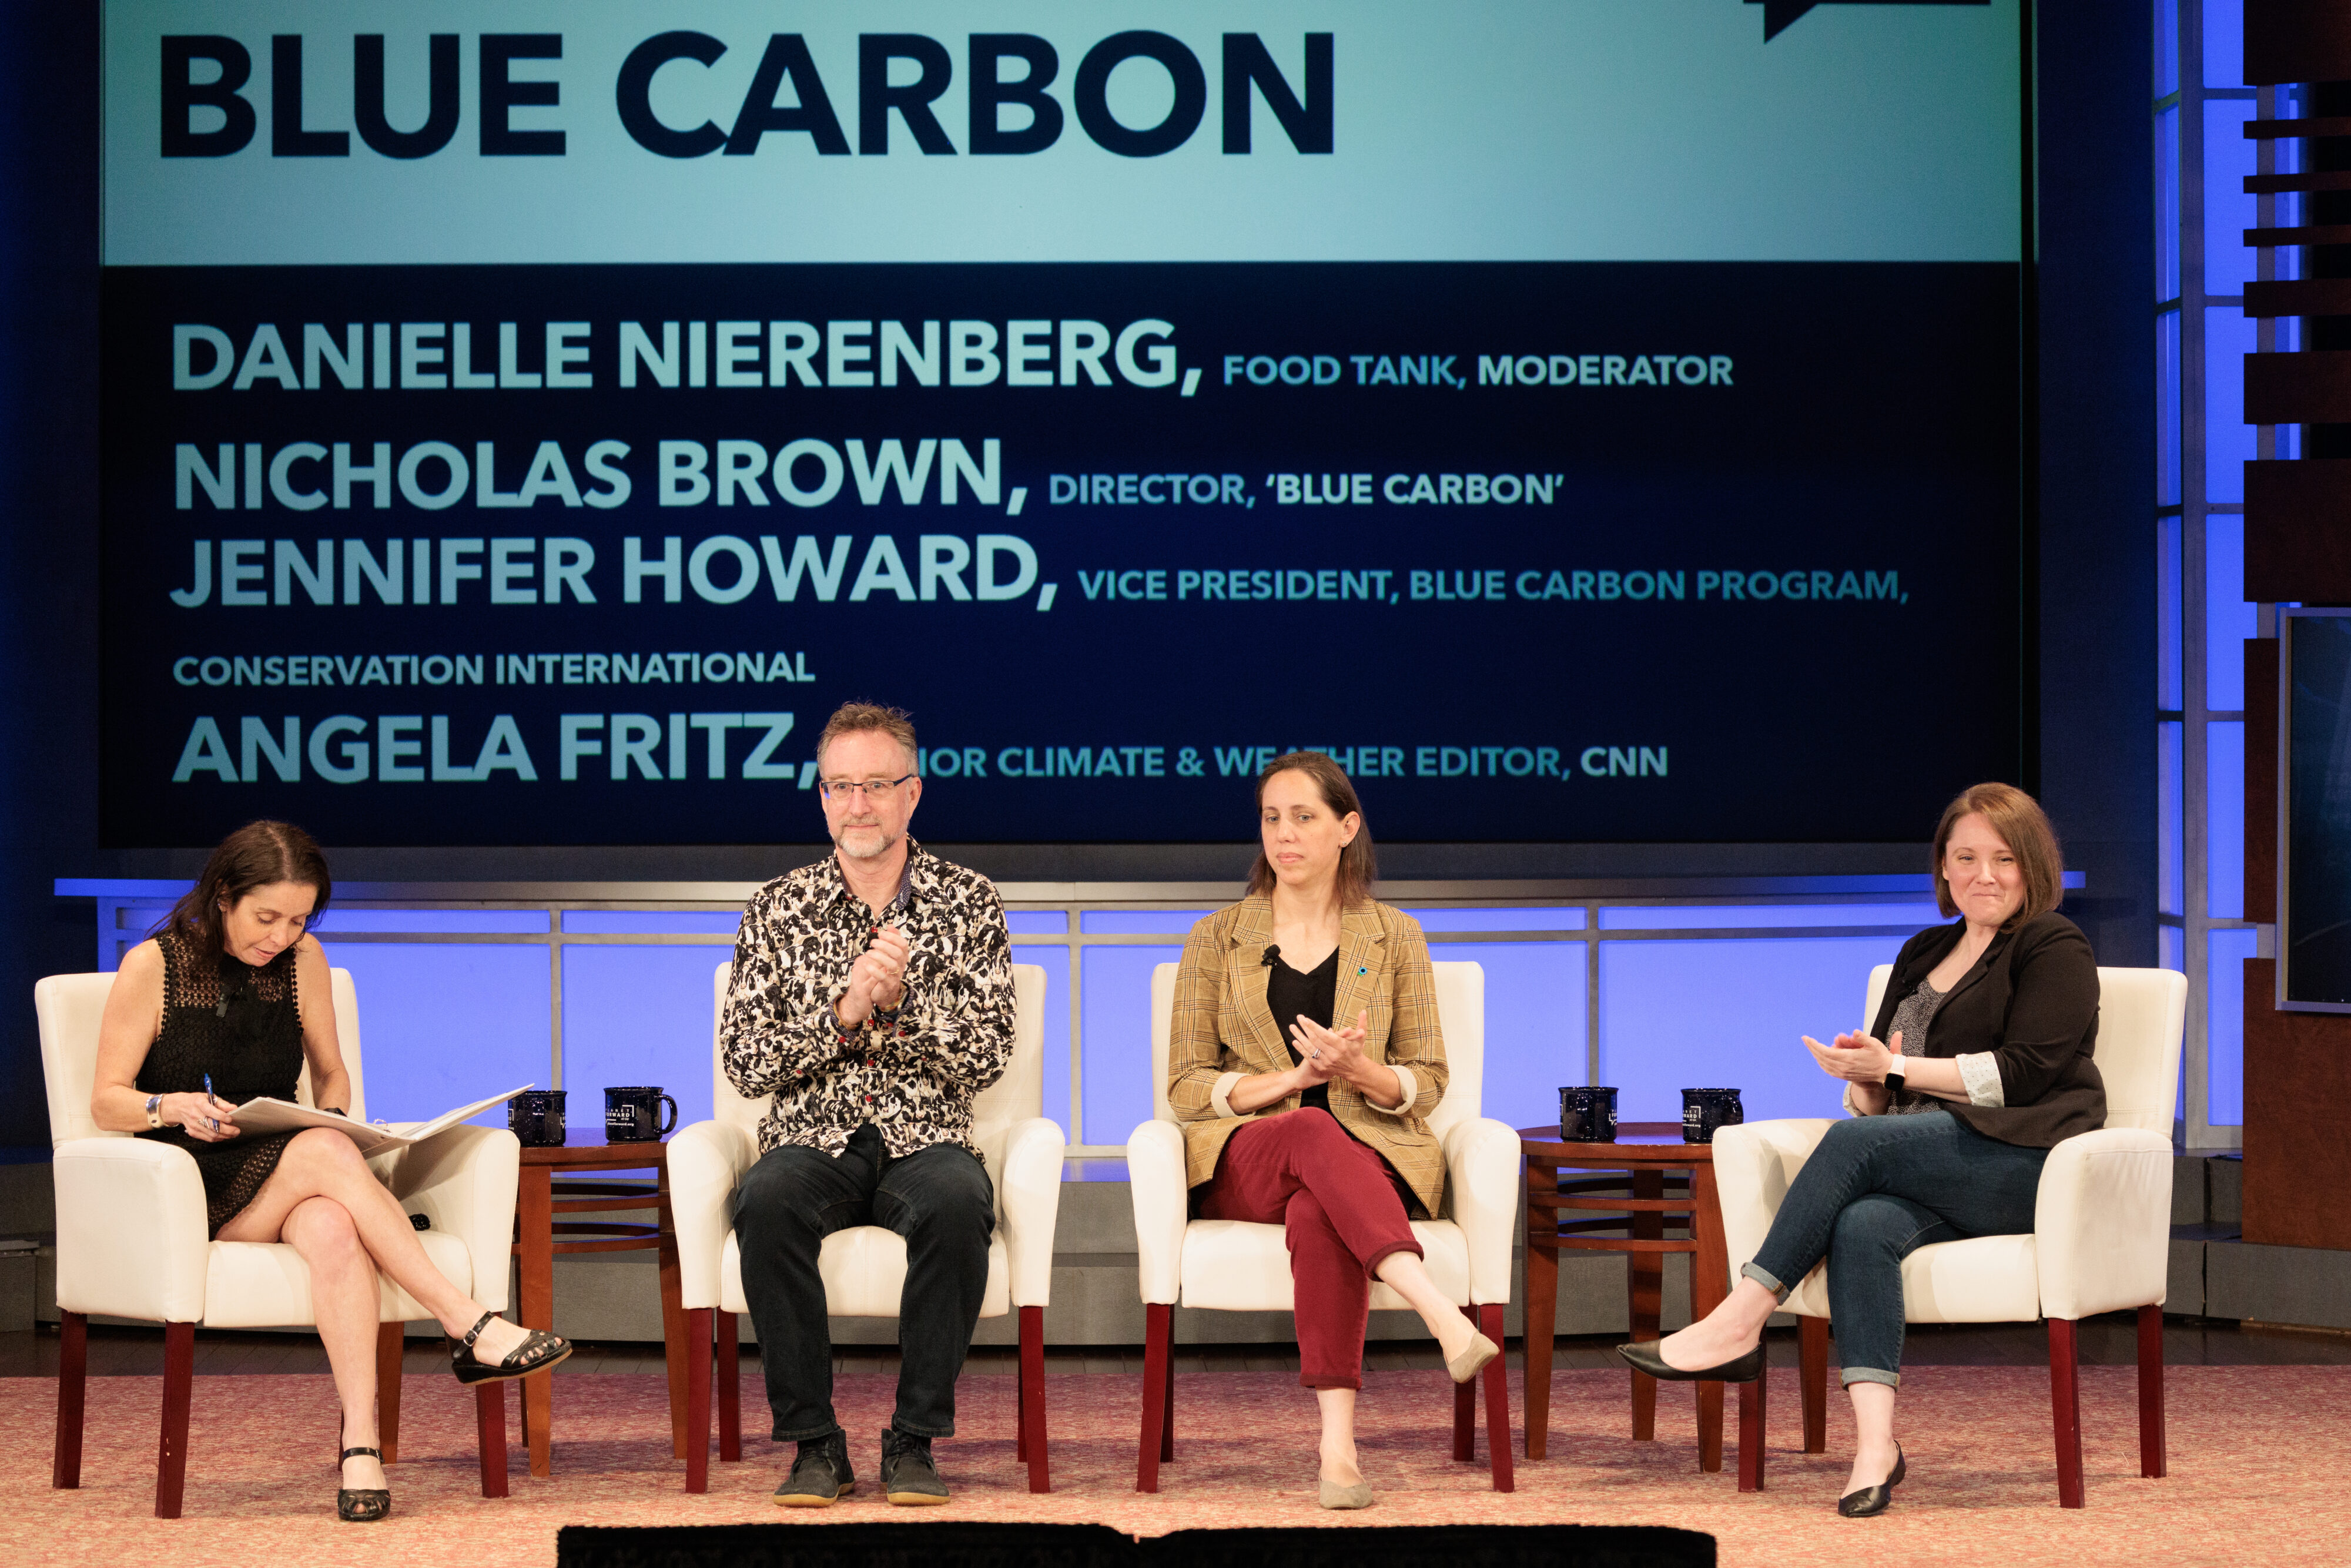 (From left to right) Danielle Nierenberg, Food Tank; Nicholas Brown, Director Blue Carbon; Jennifer Howard, Vice President, Blue Carbon Program, Conservation Internations; Angela Fritz, Senior Climate and Weather Editor, CNN; discuss the CNN documentary, Blue Carbon.